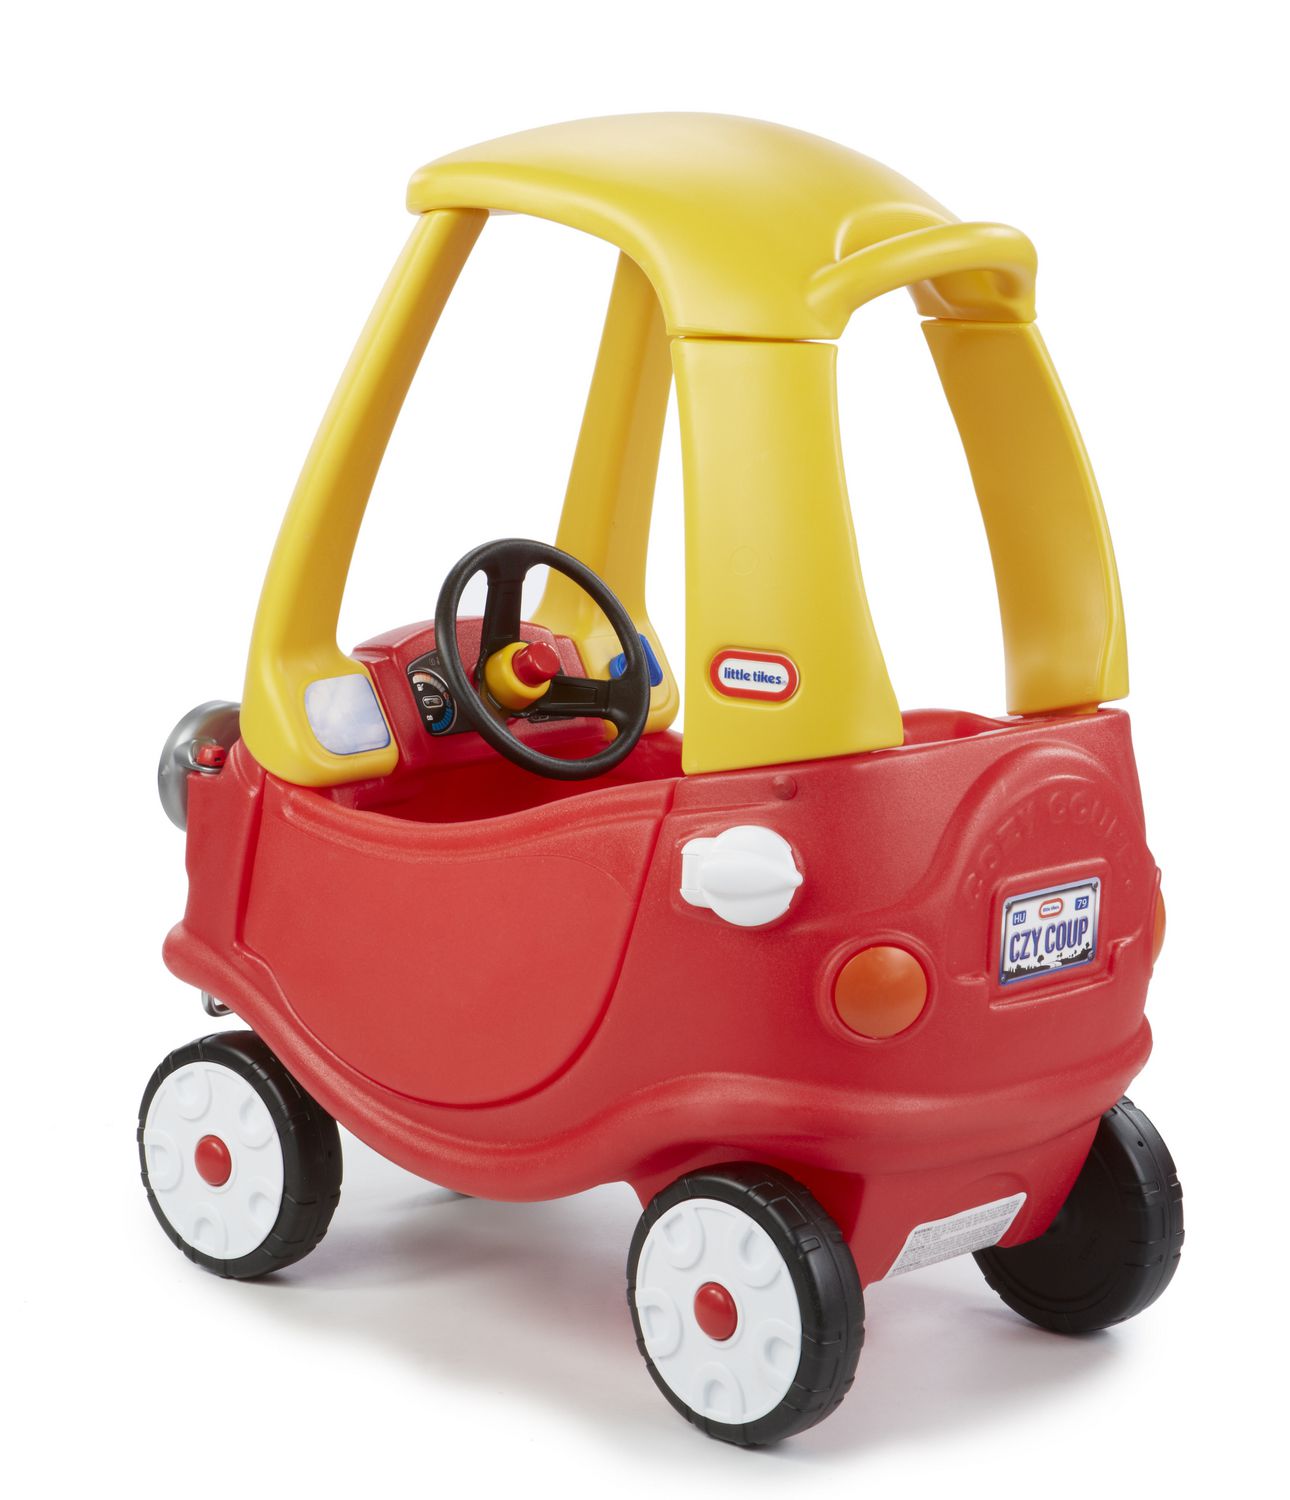 Little Tikes Cozy Coupe Toy Car | Walmart Canada